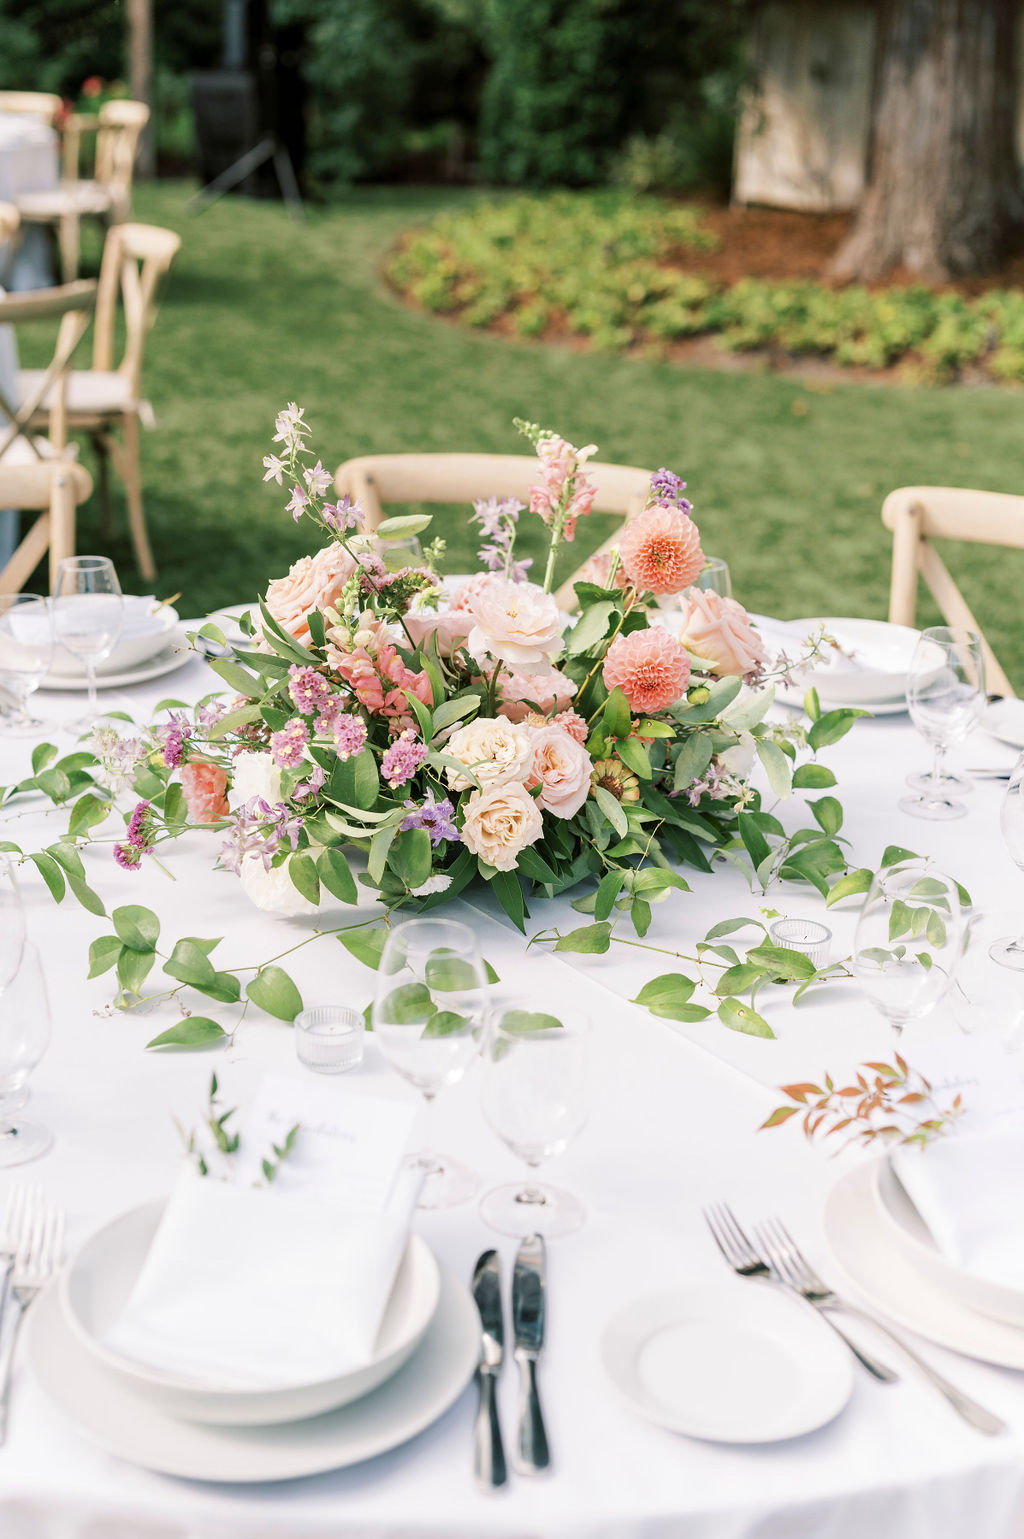 Whimsical Centerpiece